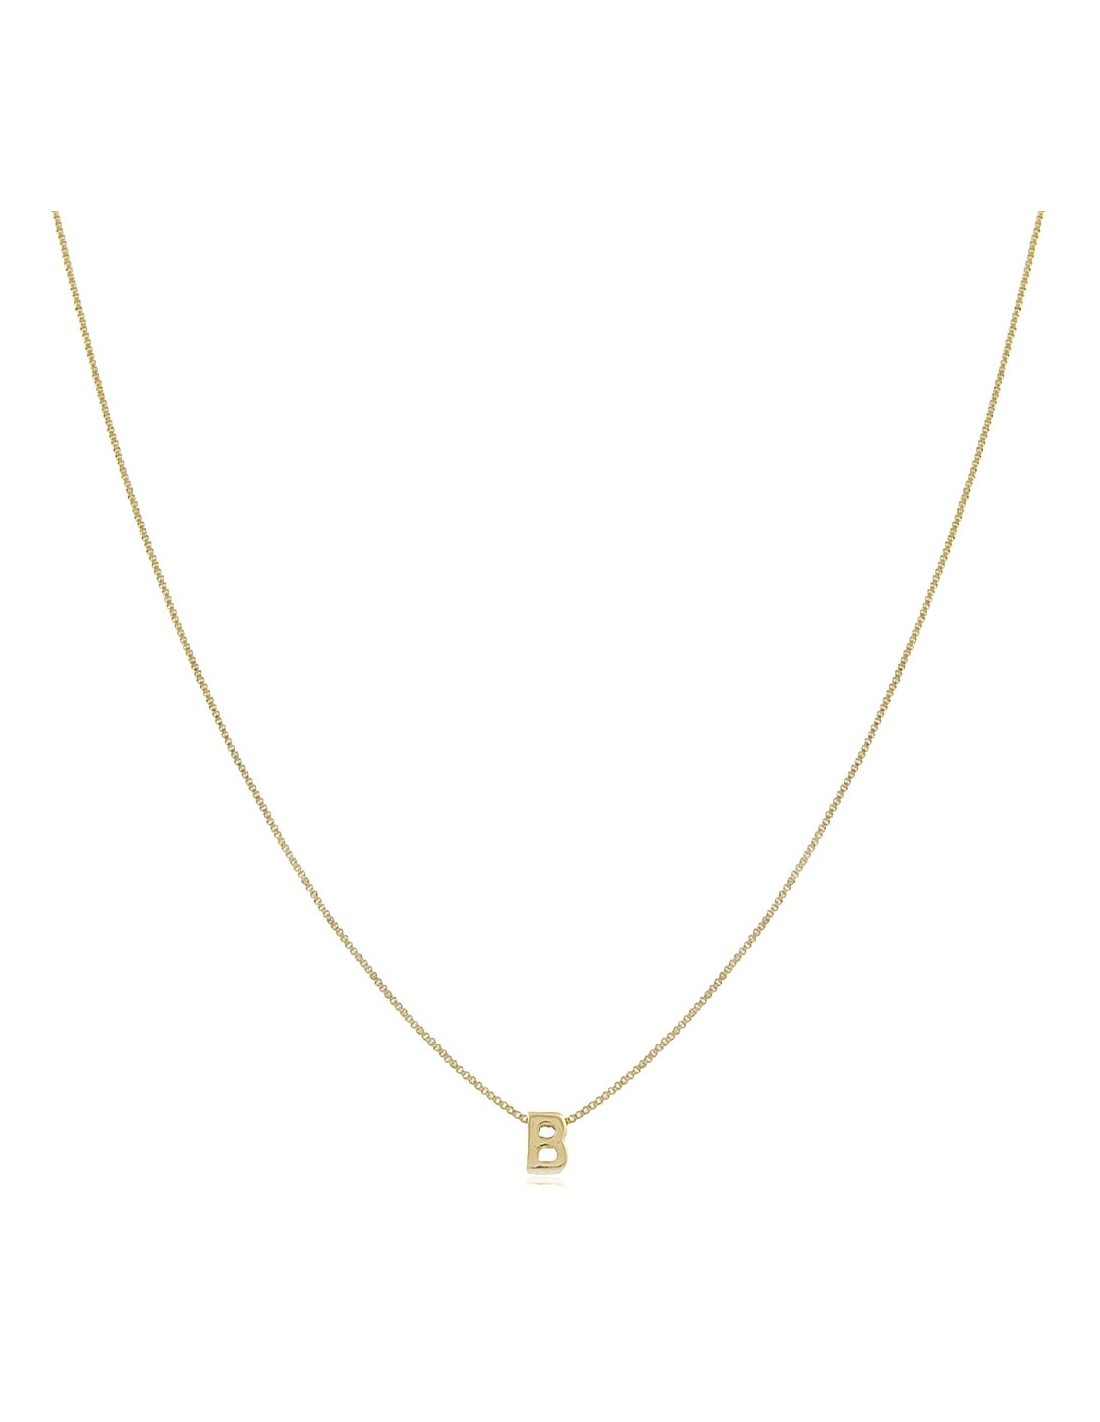 18k Gold Filled Short Thin Chain For The Pendant 18 inches 45 cm 